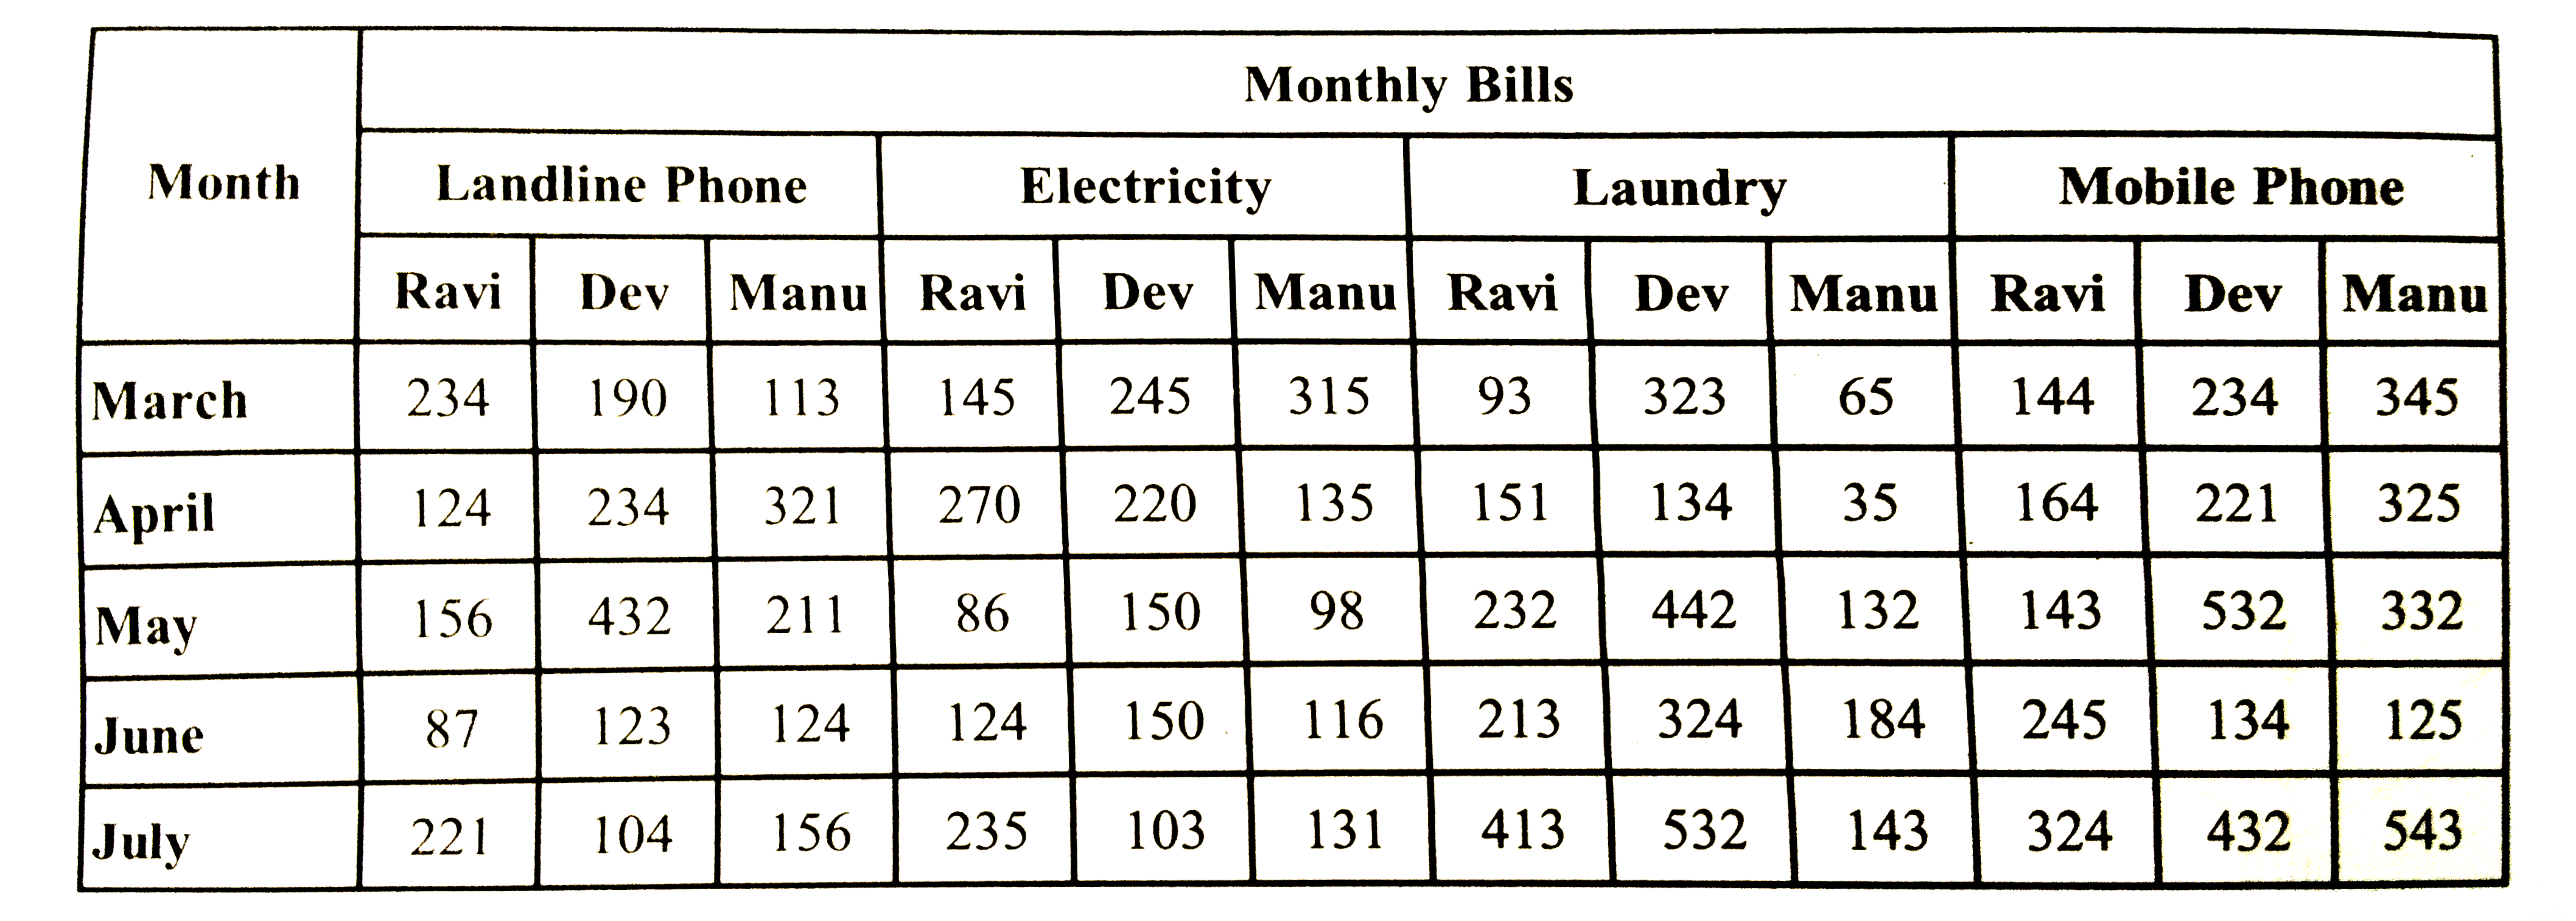 What is the respective ratio between the electricity bill paid by Manu in the month of April and the mobile phone bill paid Ravi in the month of June ?